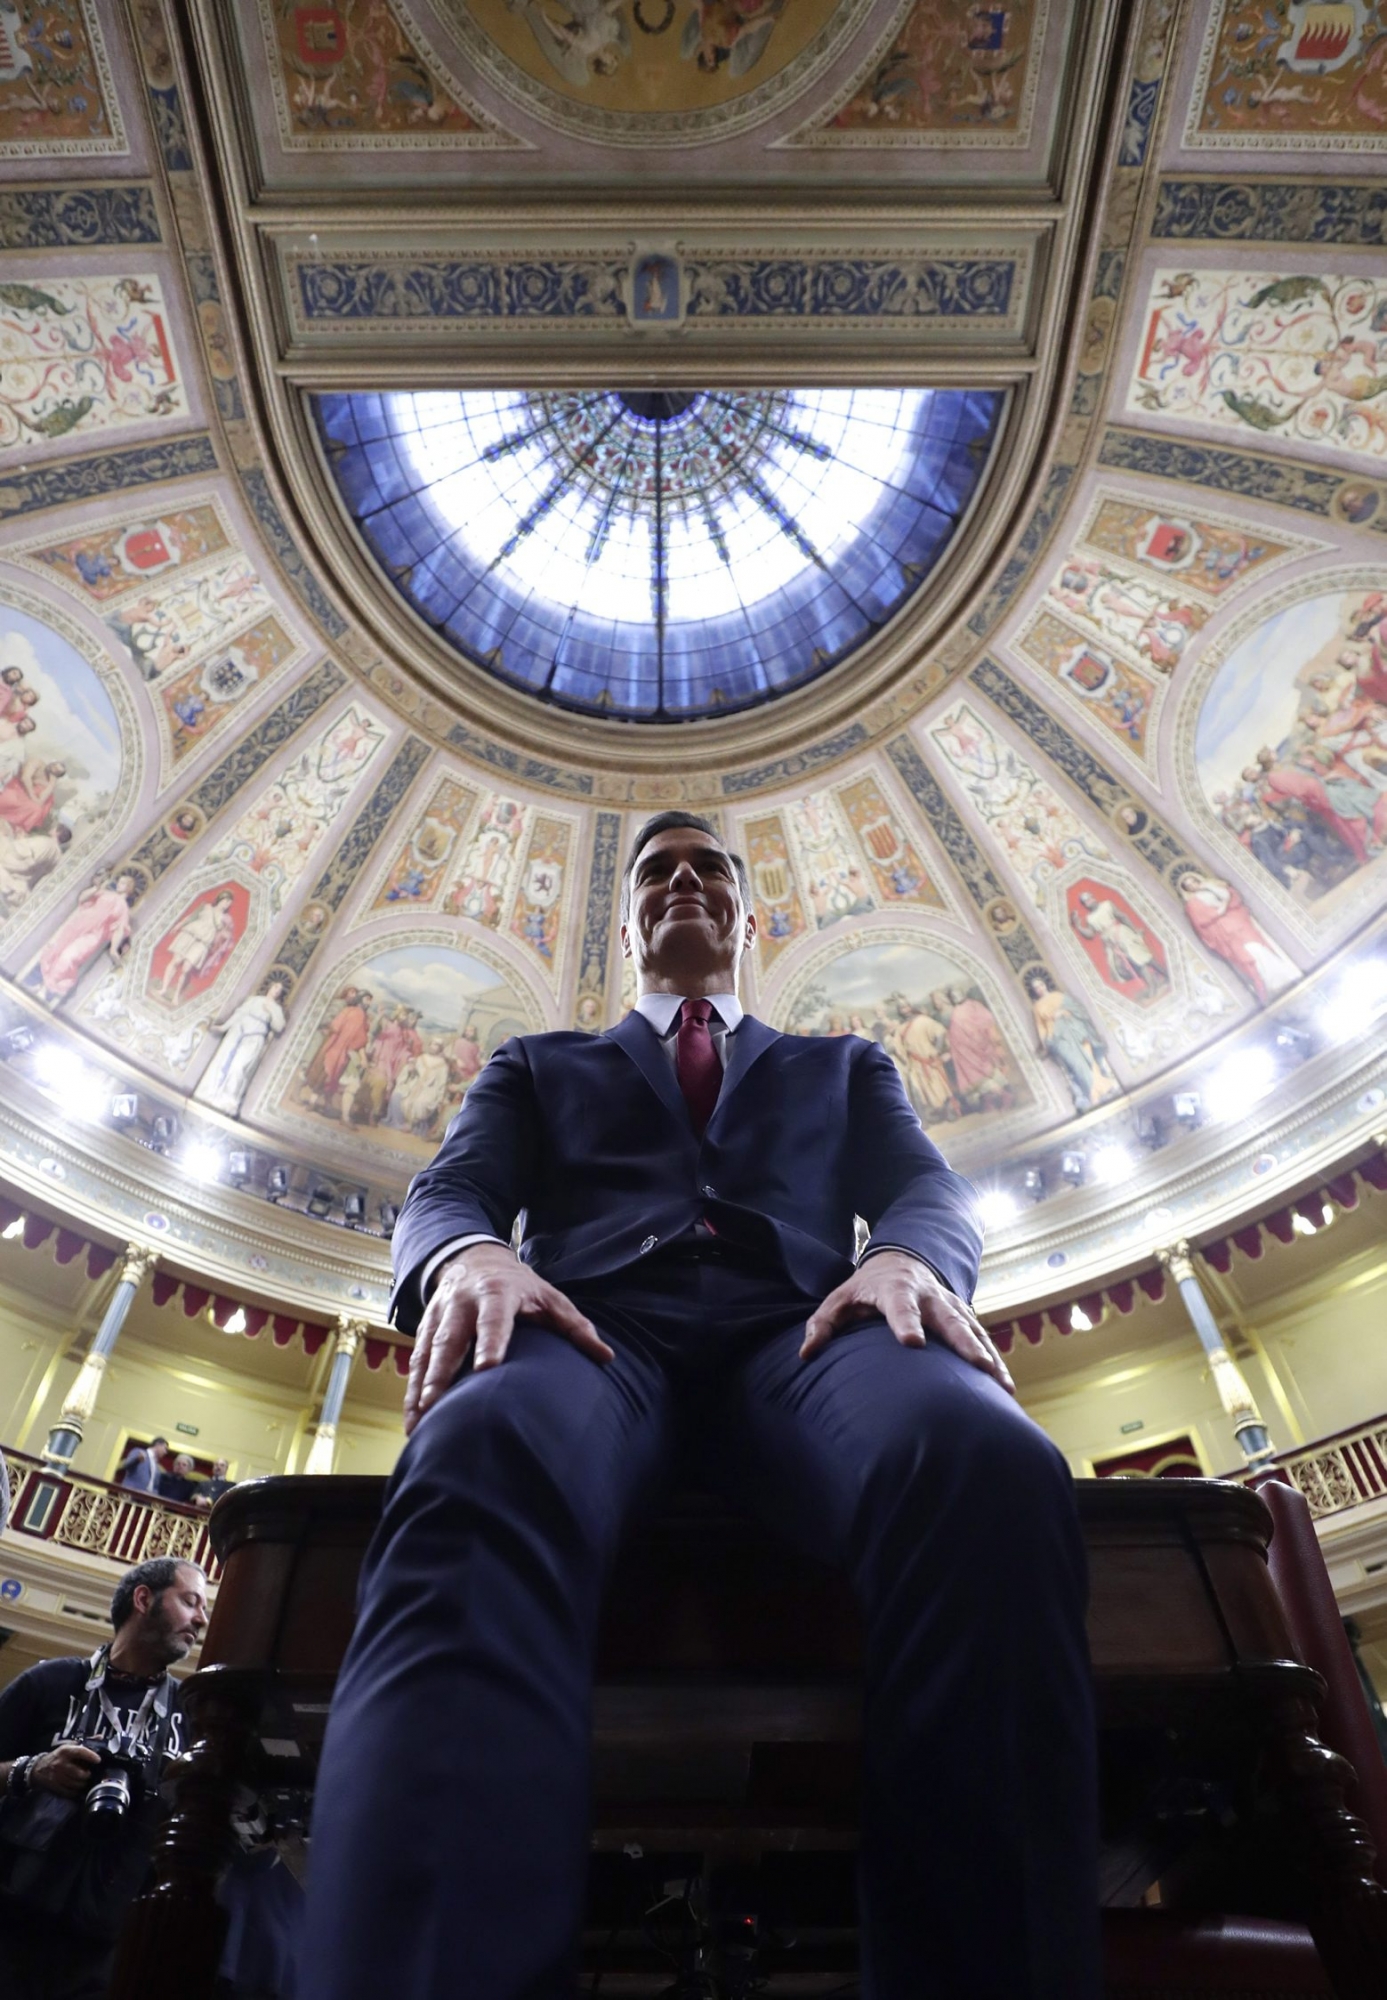 Spain's caretaker Prime Minister Pedro Sanchez poses for photographers at the Spanish parliament in Madrid Tuesday, Jan. 7, 2020. Spain's parliament chose Socialist leader Pedro Sánchez to form a new government Tuesday, ending almost a year of political limbo for the eurozone's fourth-largest economy. Sánchez won a cliff-hanger confidence vote 167-165, with 18 abstentions. It was the slimmest victory for a prime minister candidate in decades.(AP Photo/Manu Fernandez)
Pedro Sanchez Spain Politics